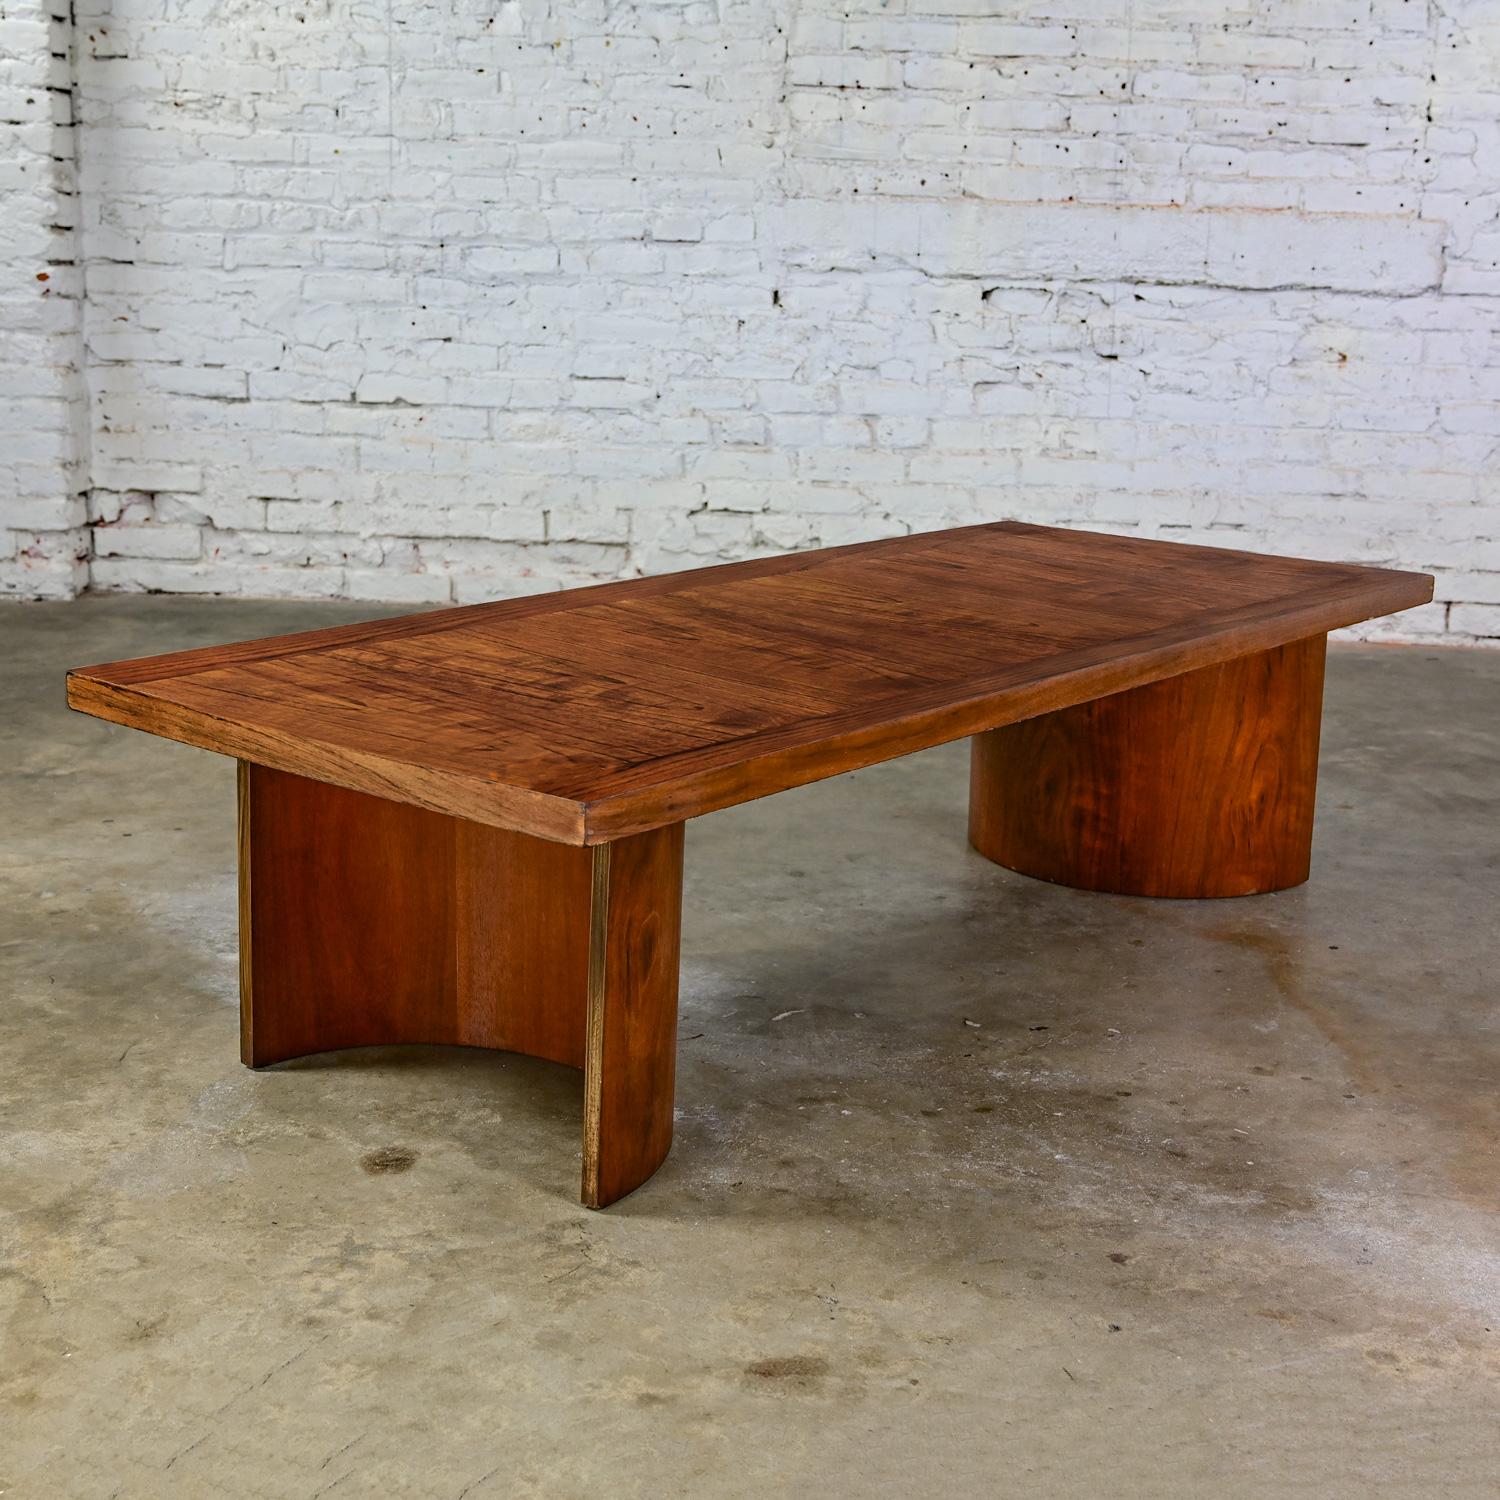 1970’s Modern Coffee Table Kroehler Rectangle Top Bentwood Curved Double U Base For Sale 8